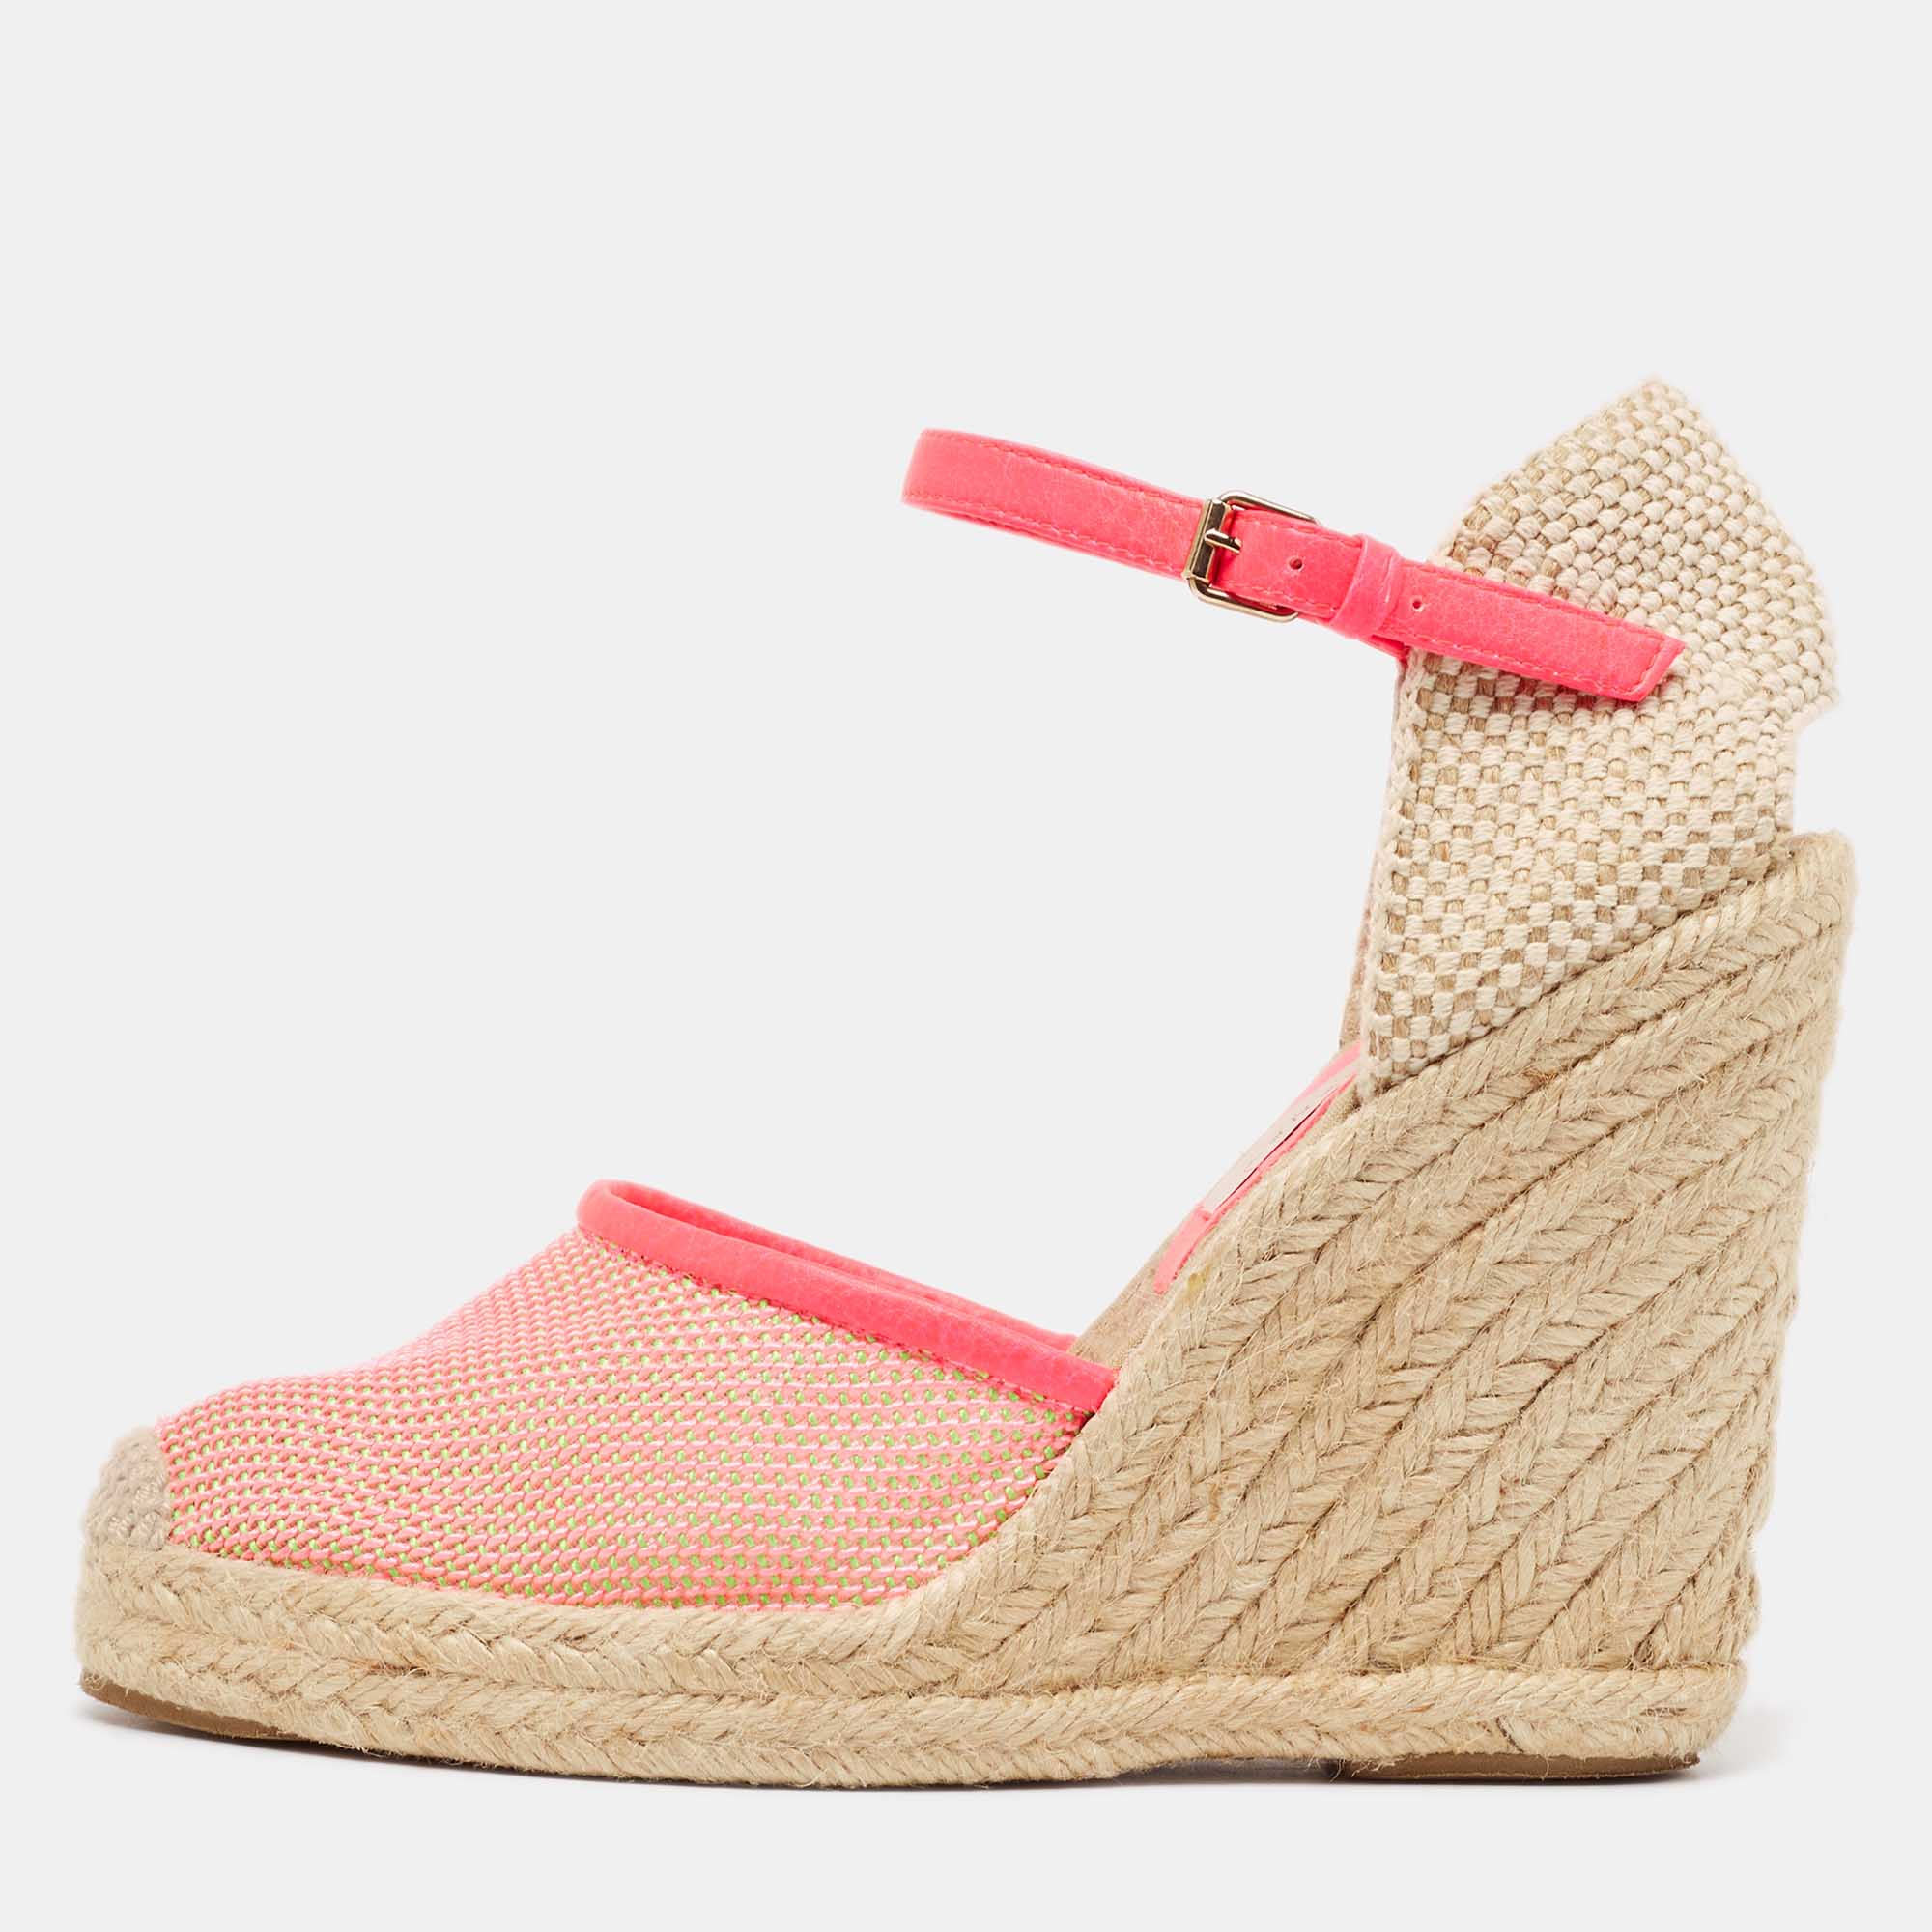 Stella mccartney pink/beige mesh and woven canvas wedge espadrille ankle strap sandals size 38